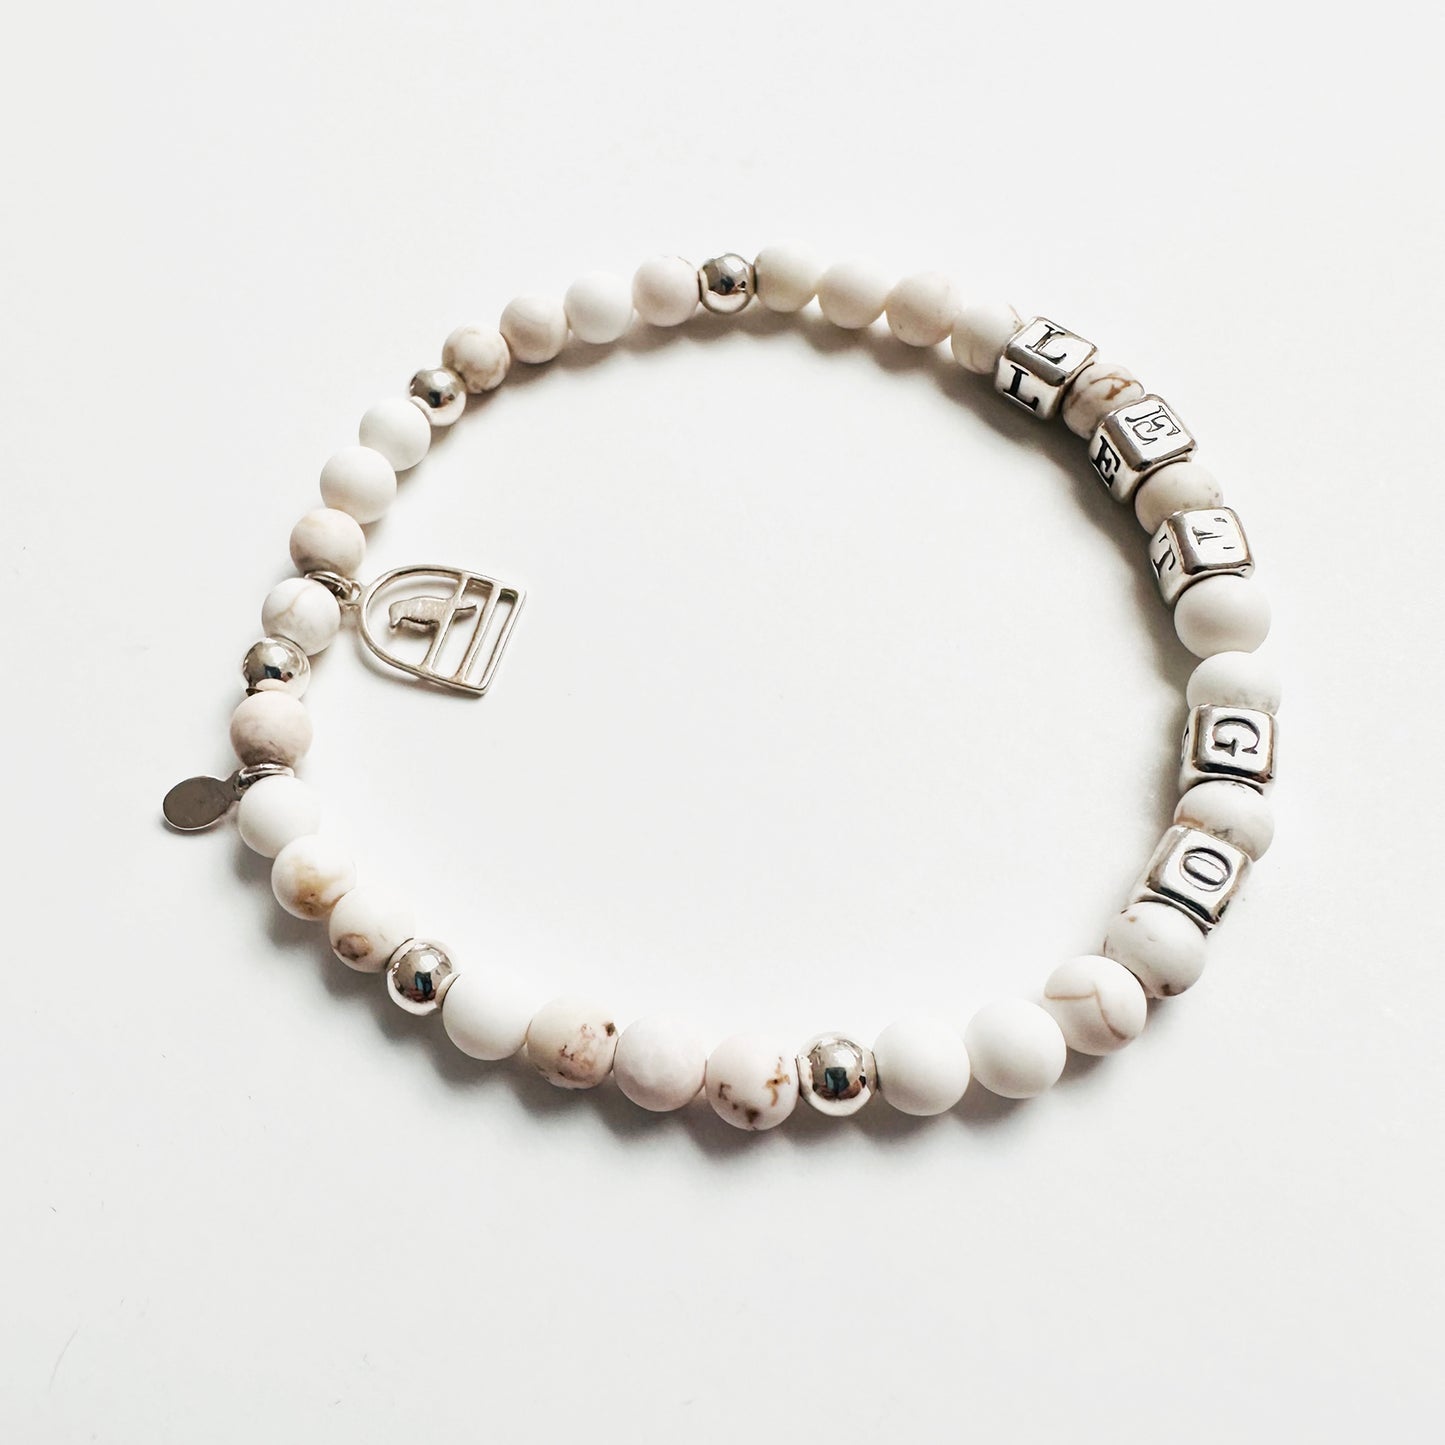 Let Go stretch bracelet in sterling silver and white howlite beads, with sterling silver bird charm